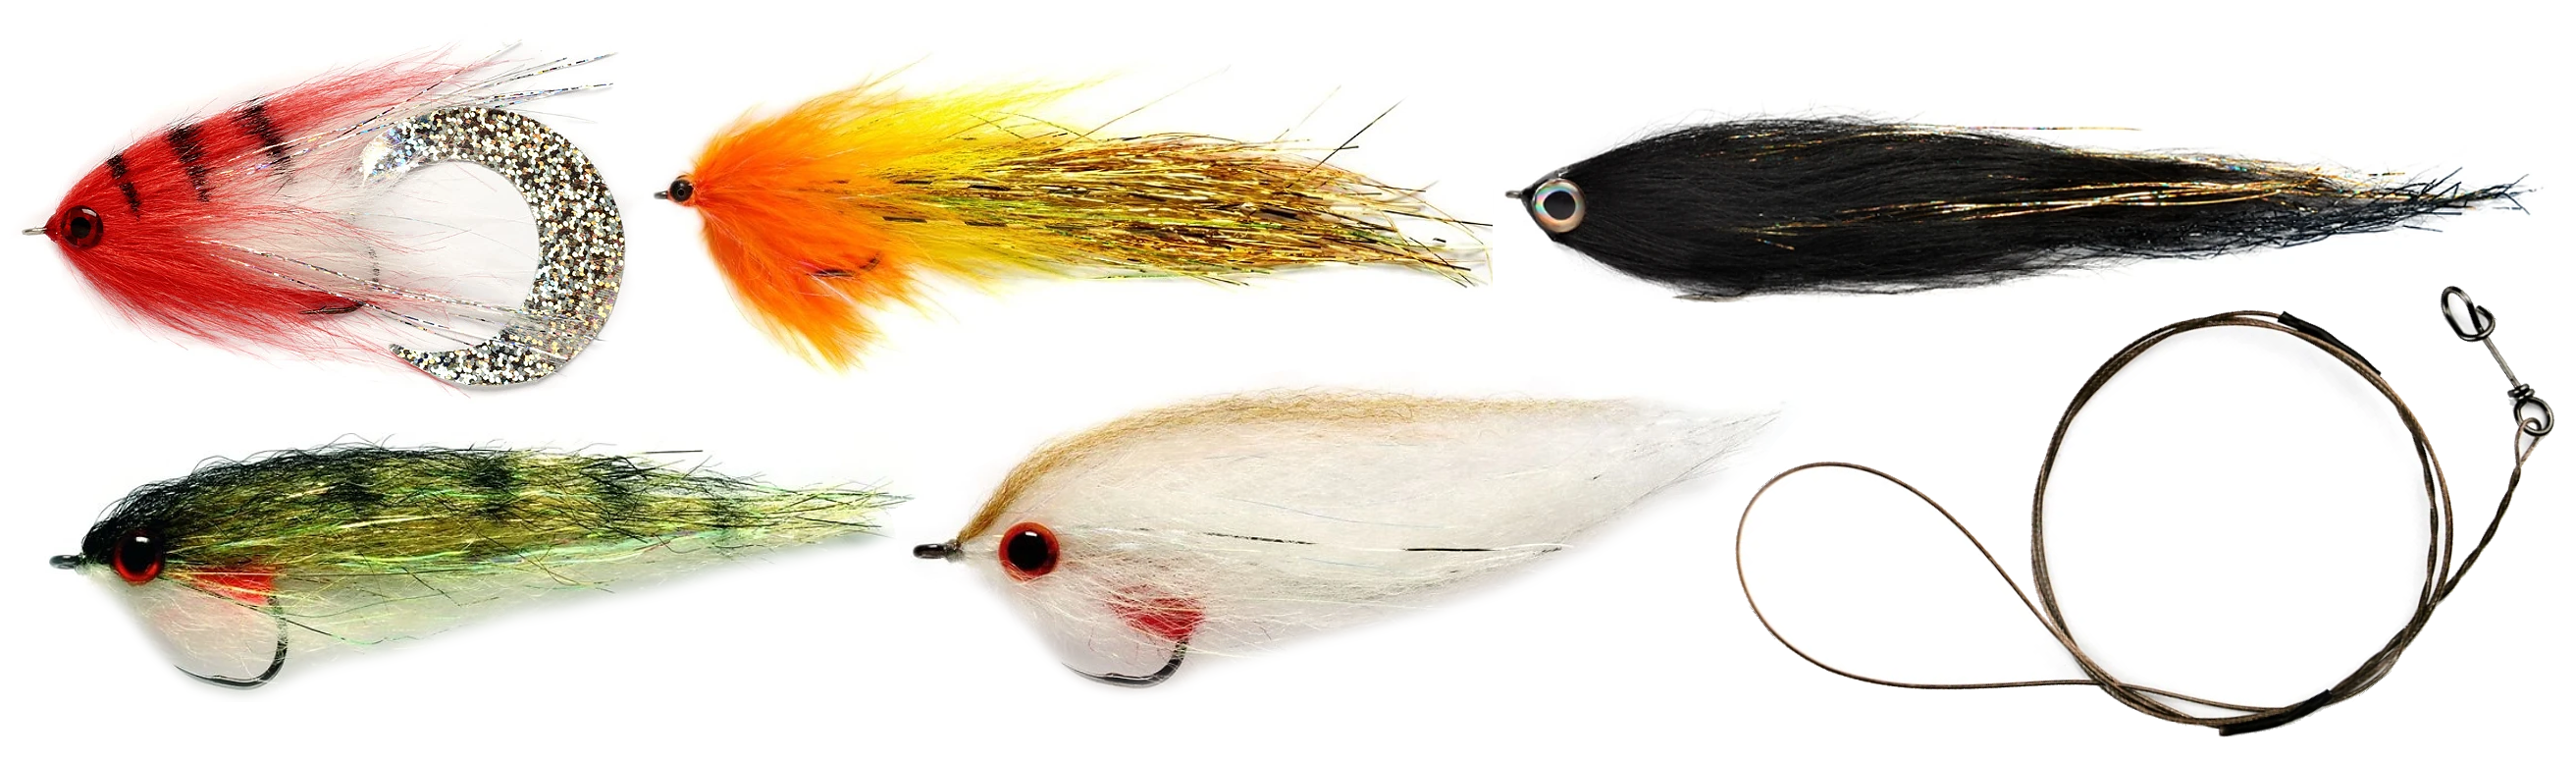 TOP 5 Pike Streamers - Fly Selection